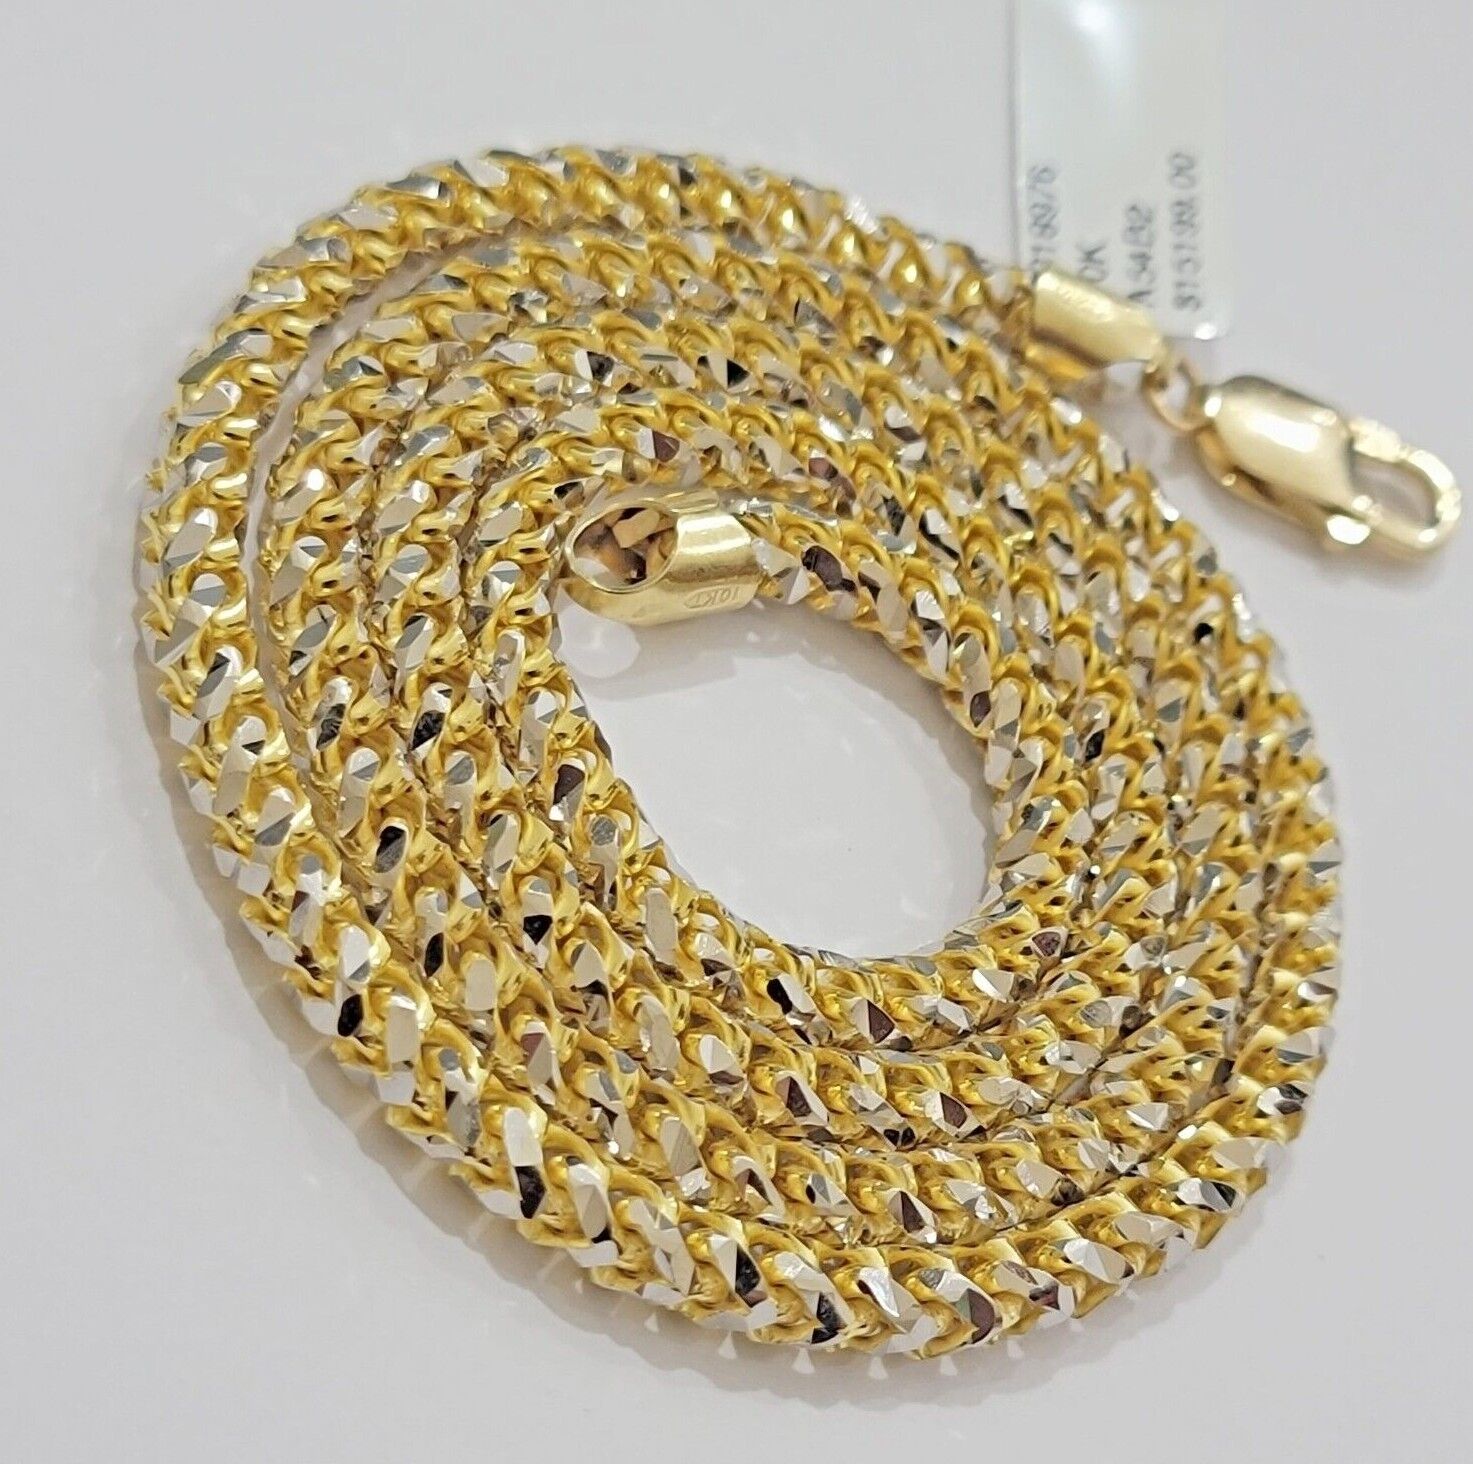 Solid 10k Gold Palm Chain Tennis Necklace Diamond cuts 4.5mm 22